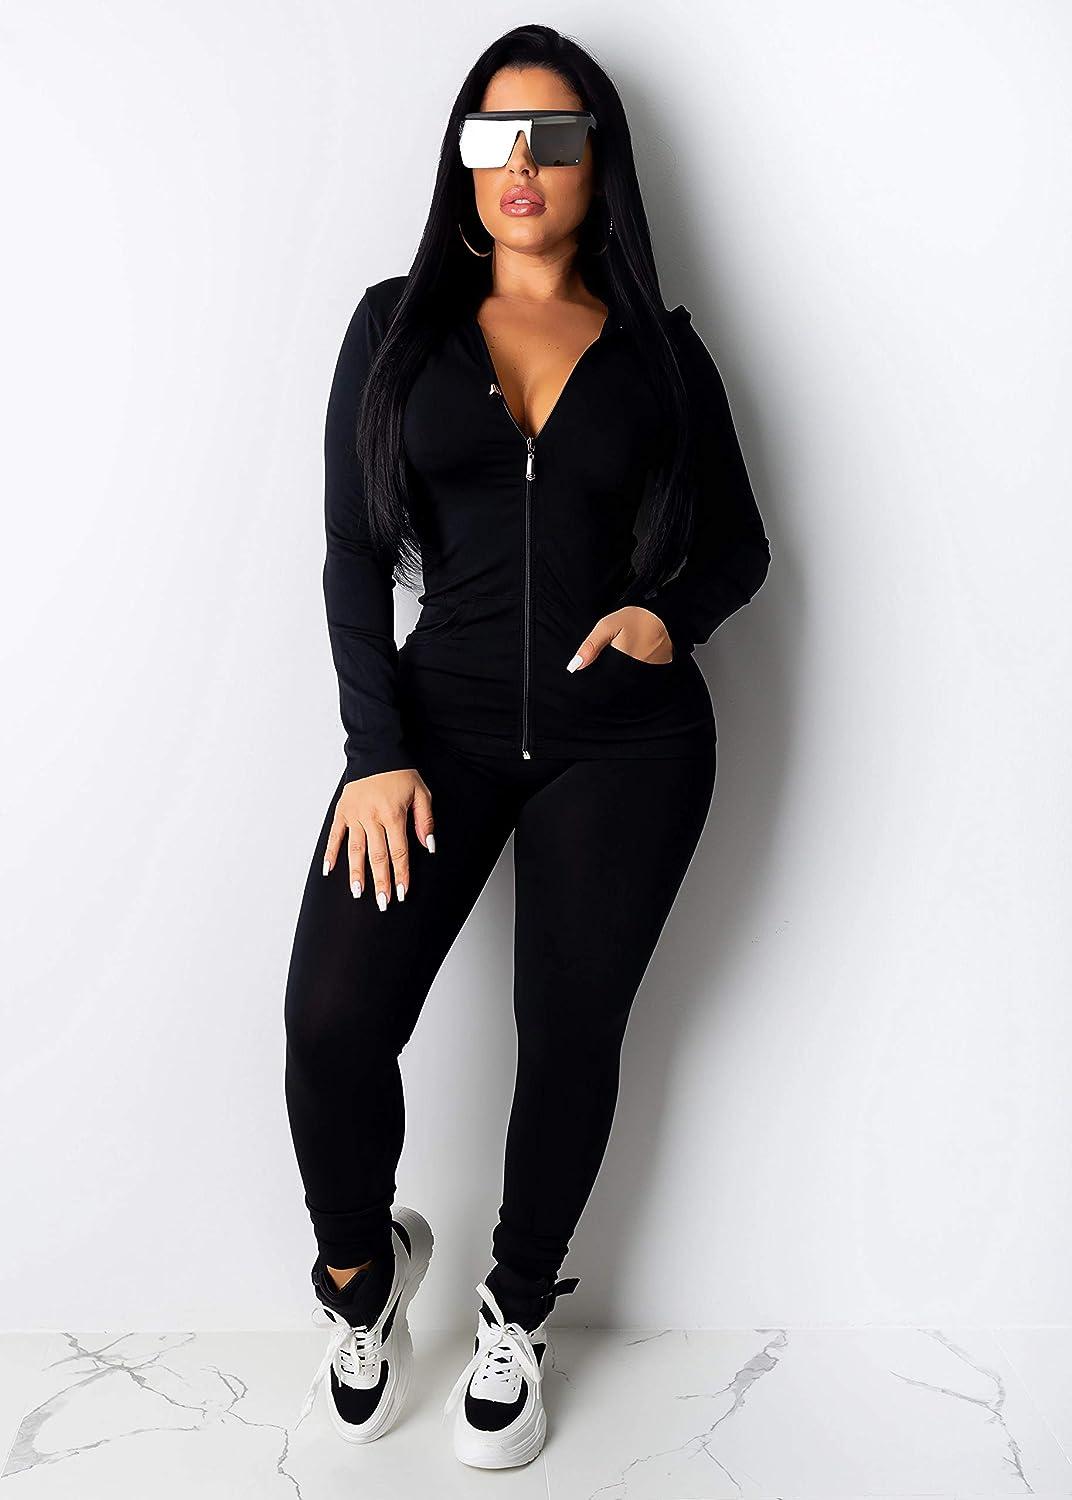 Blacked Out Apparel Women's Sweatsuits – Blacked out apparel